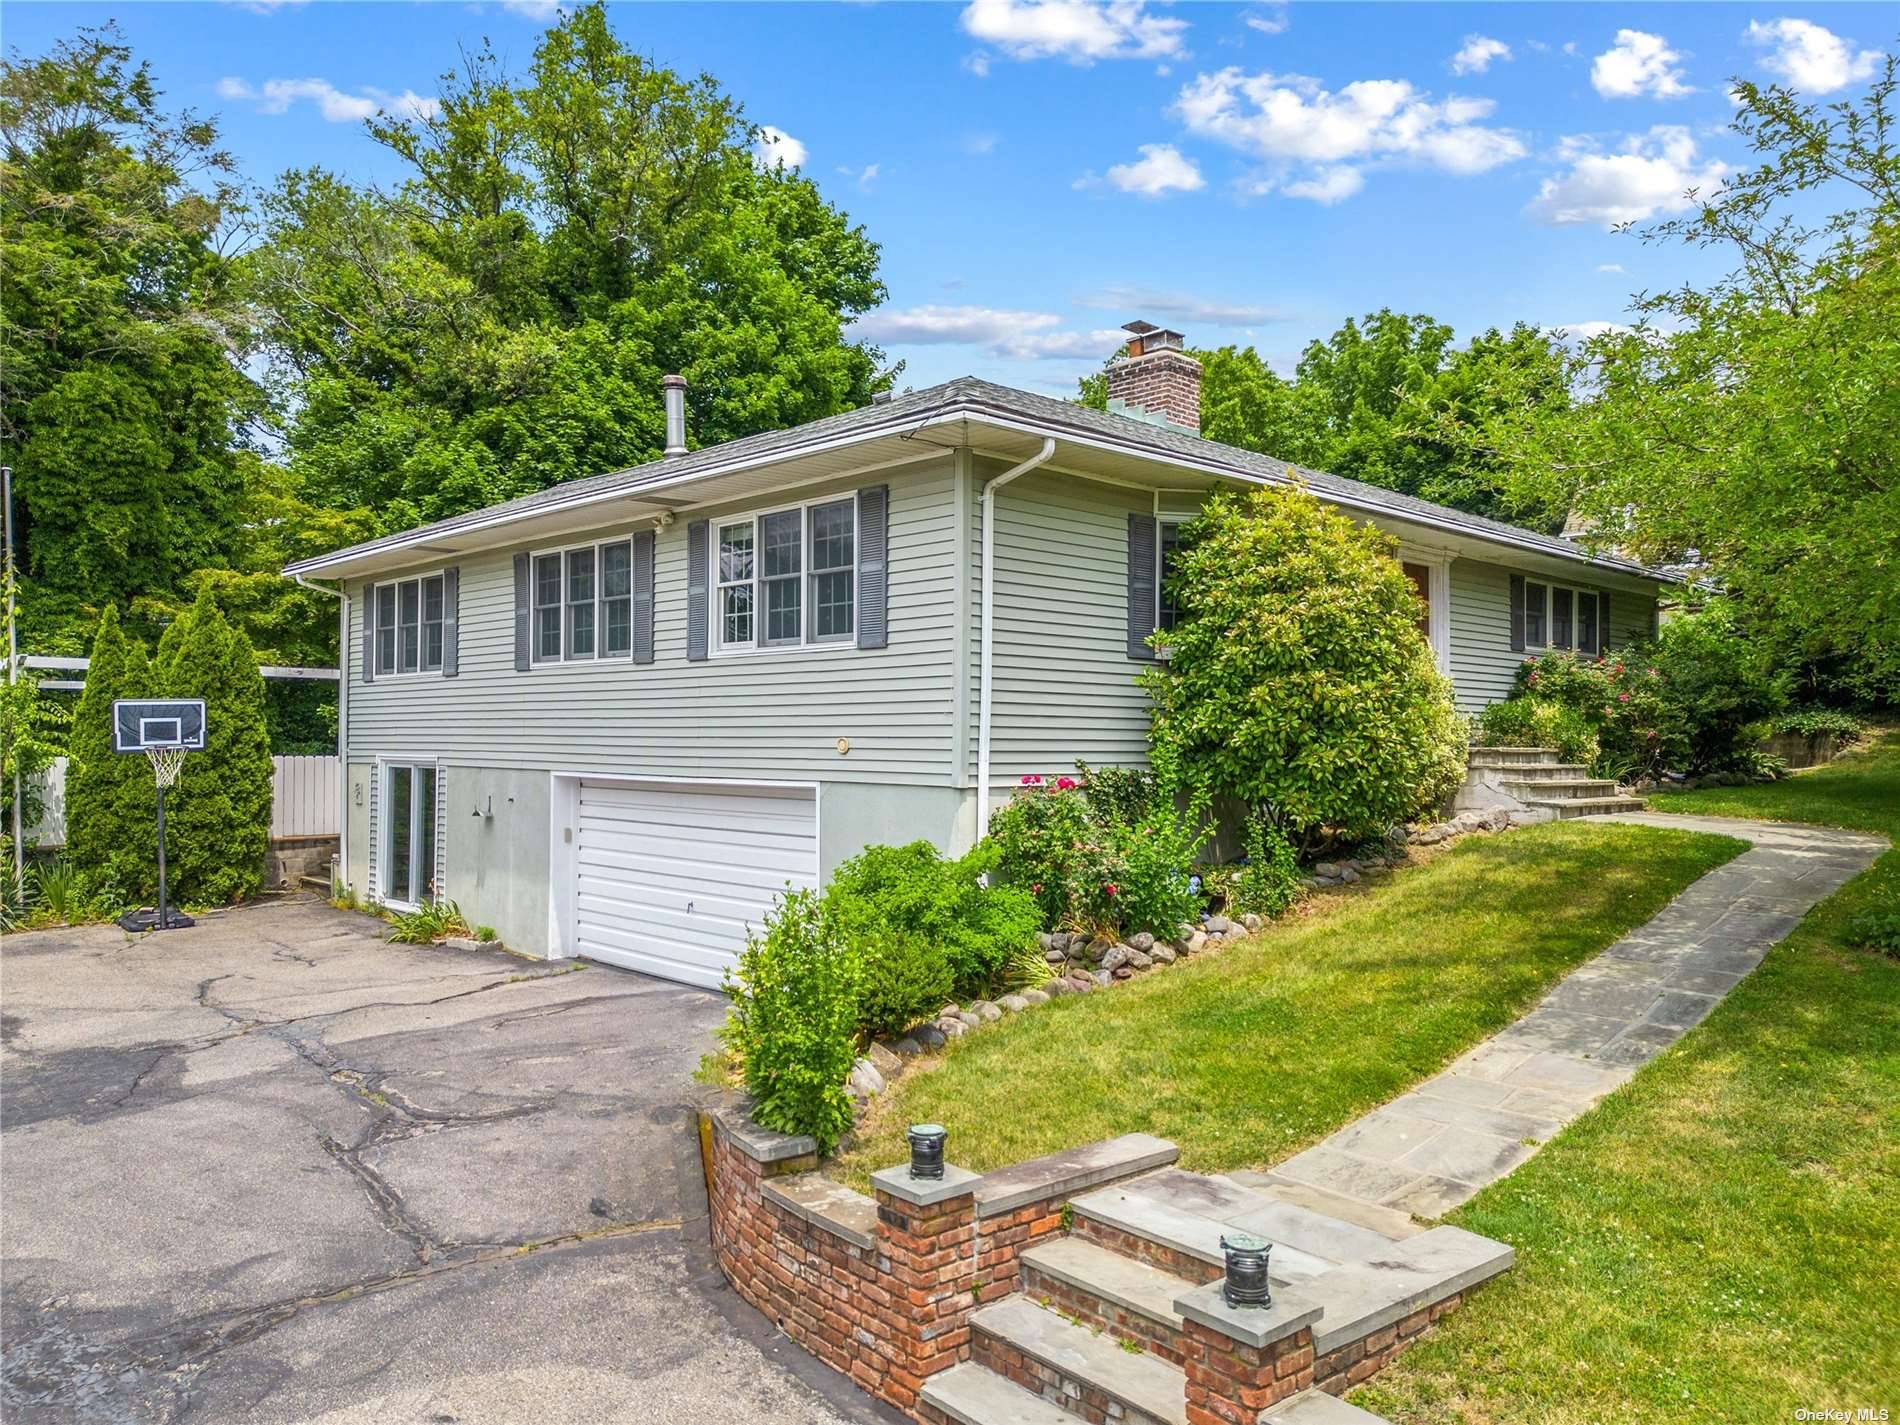 Experience the charm and elegance of this Hi Ranch property, Located In The North Shore School District and within close proximity to the beach and LIRR Glen head station.